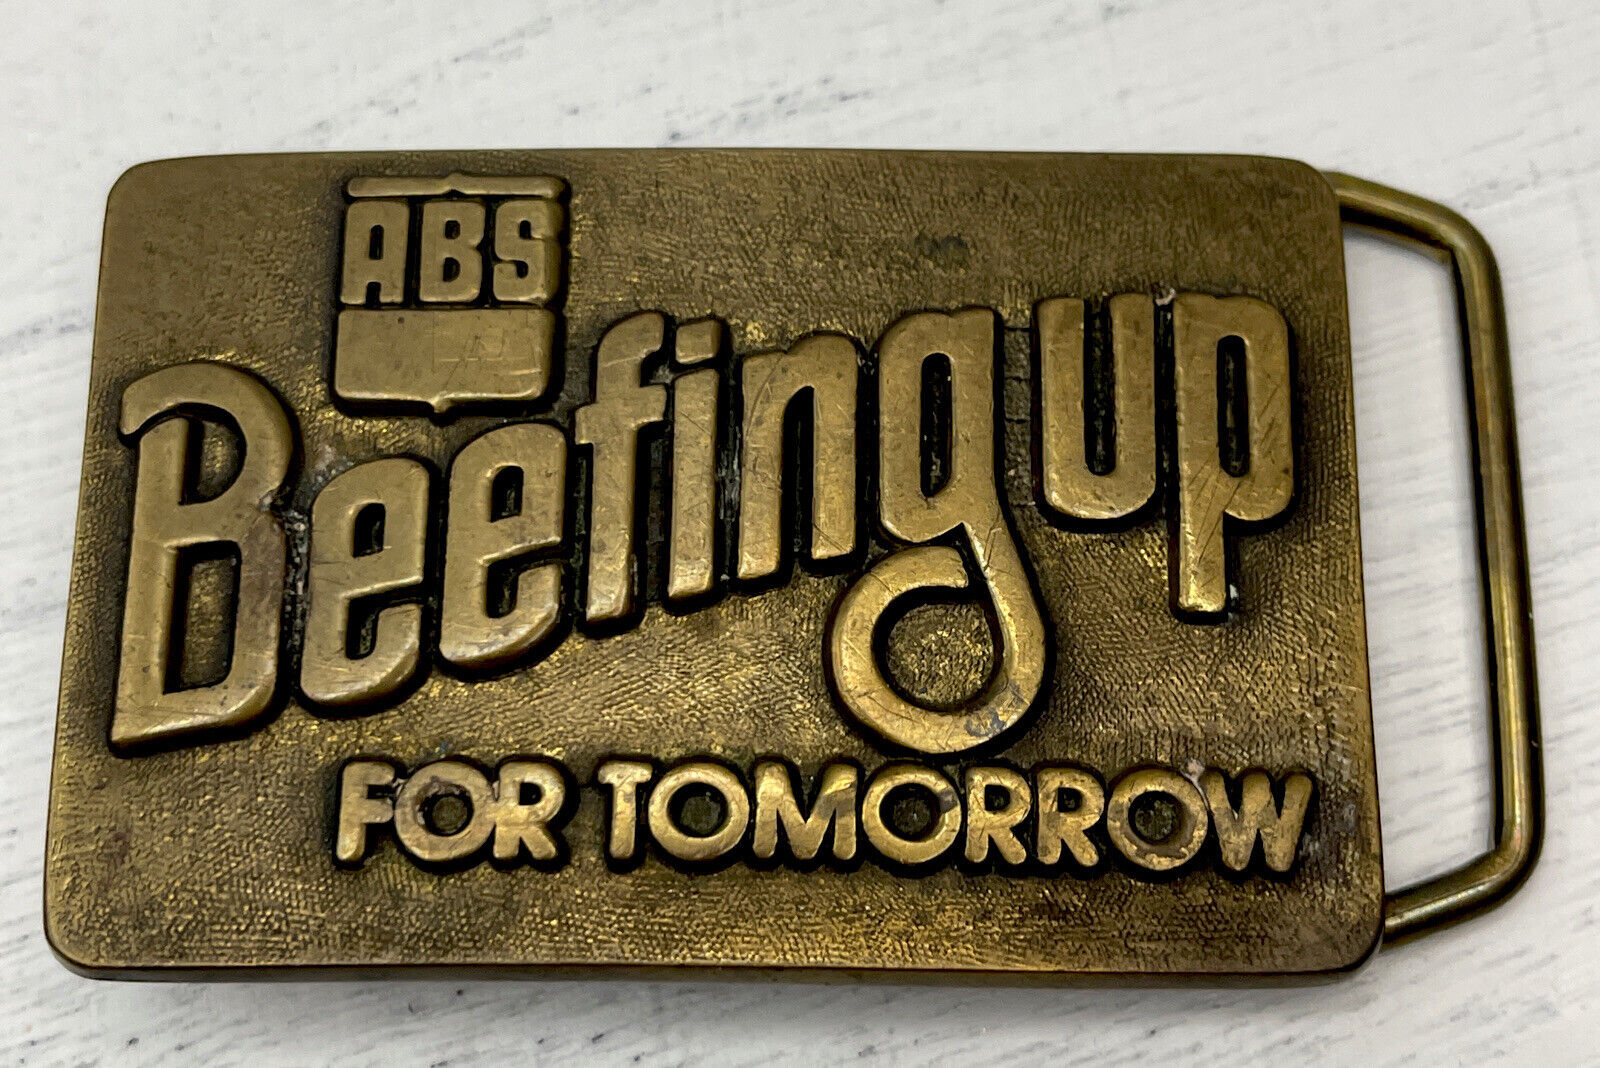 Vintage ABS Beefing Up for Tomorrow Belt Buckle Western BTS 1979 - Solid Brass